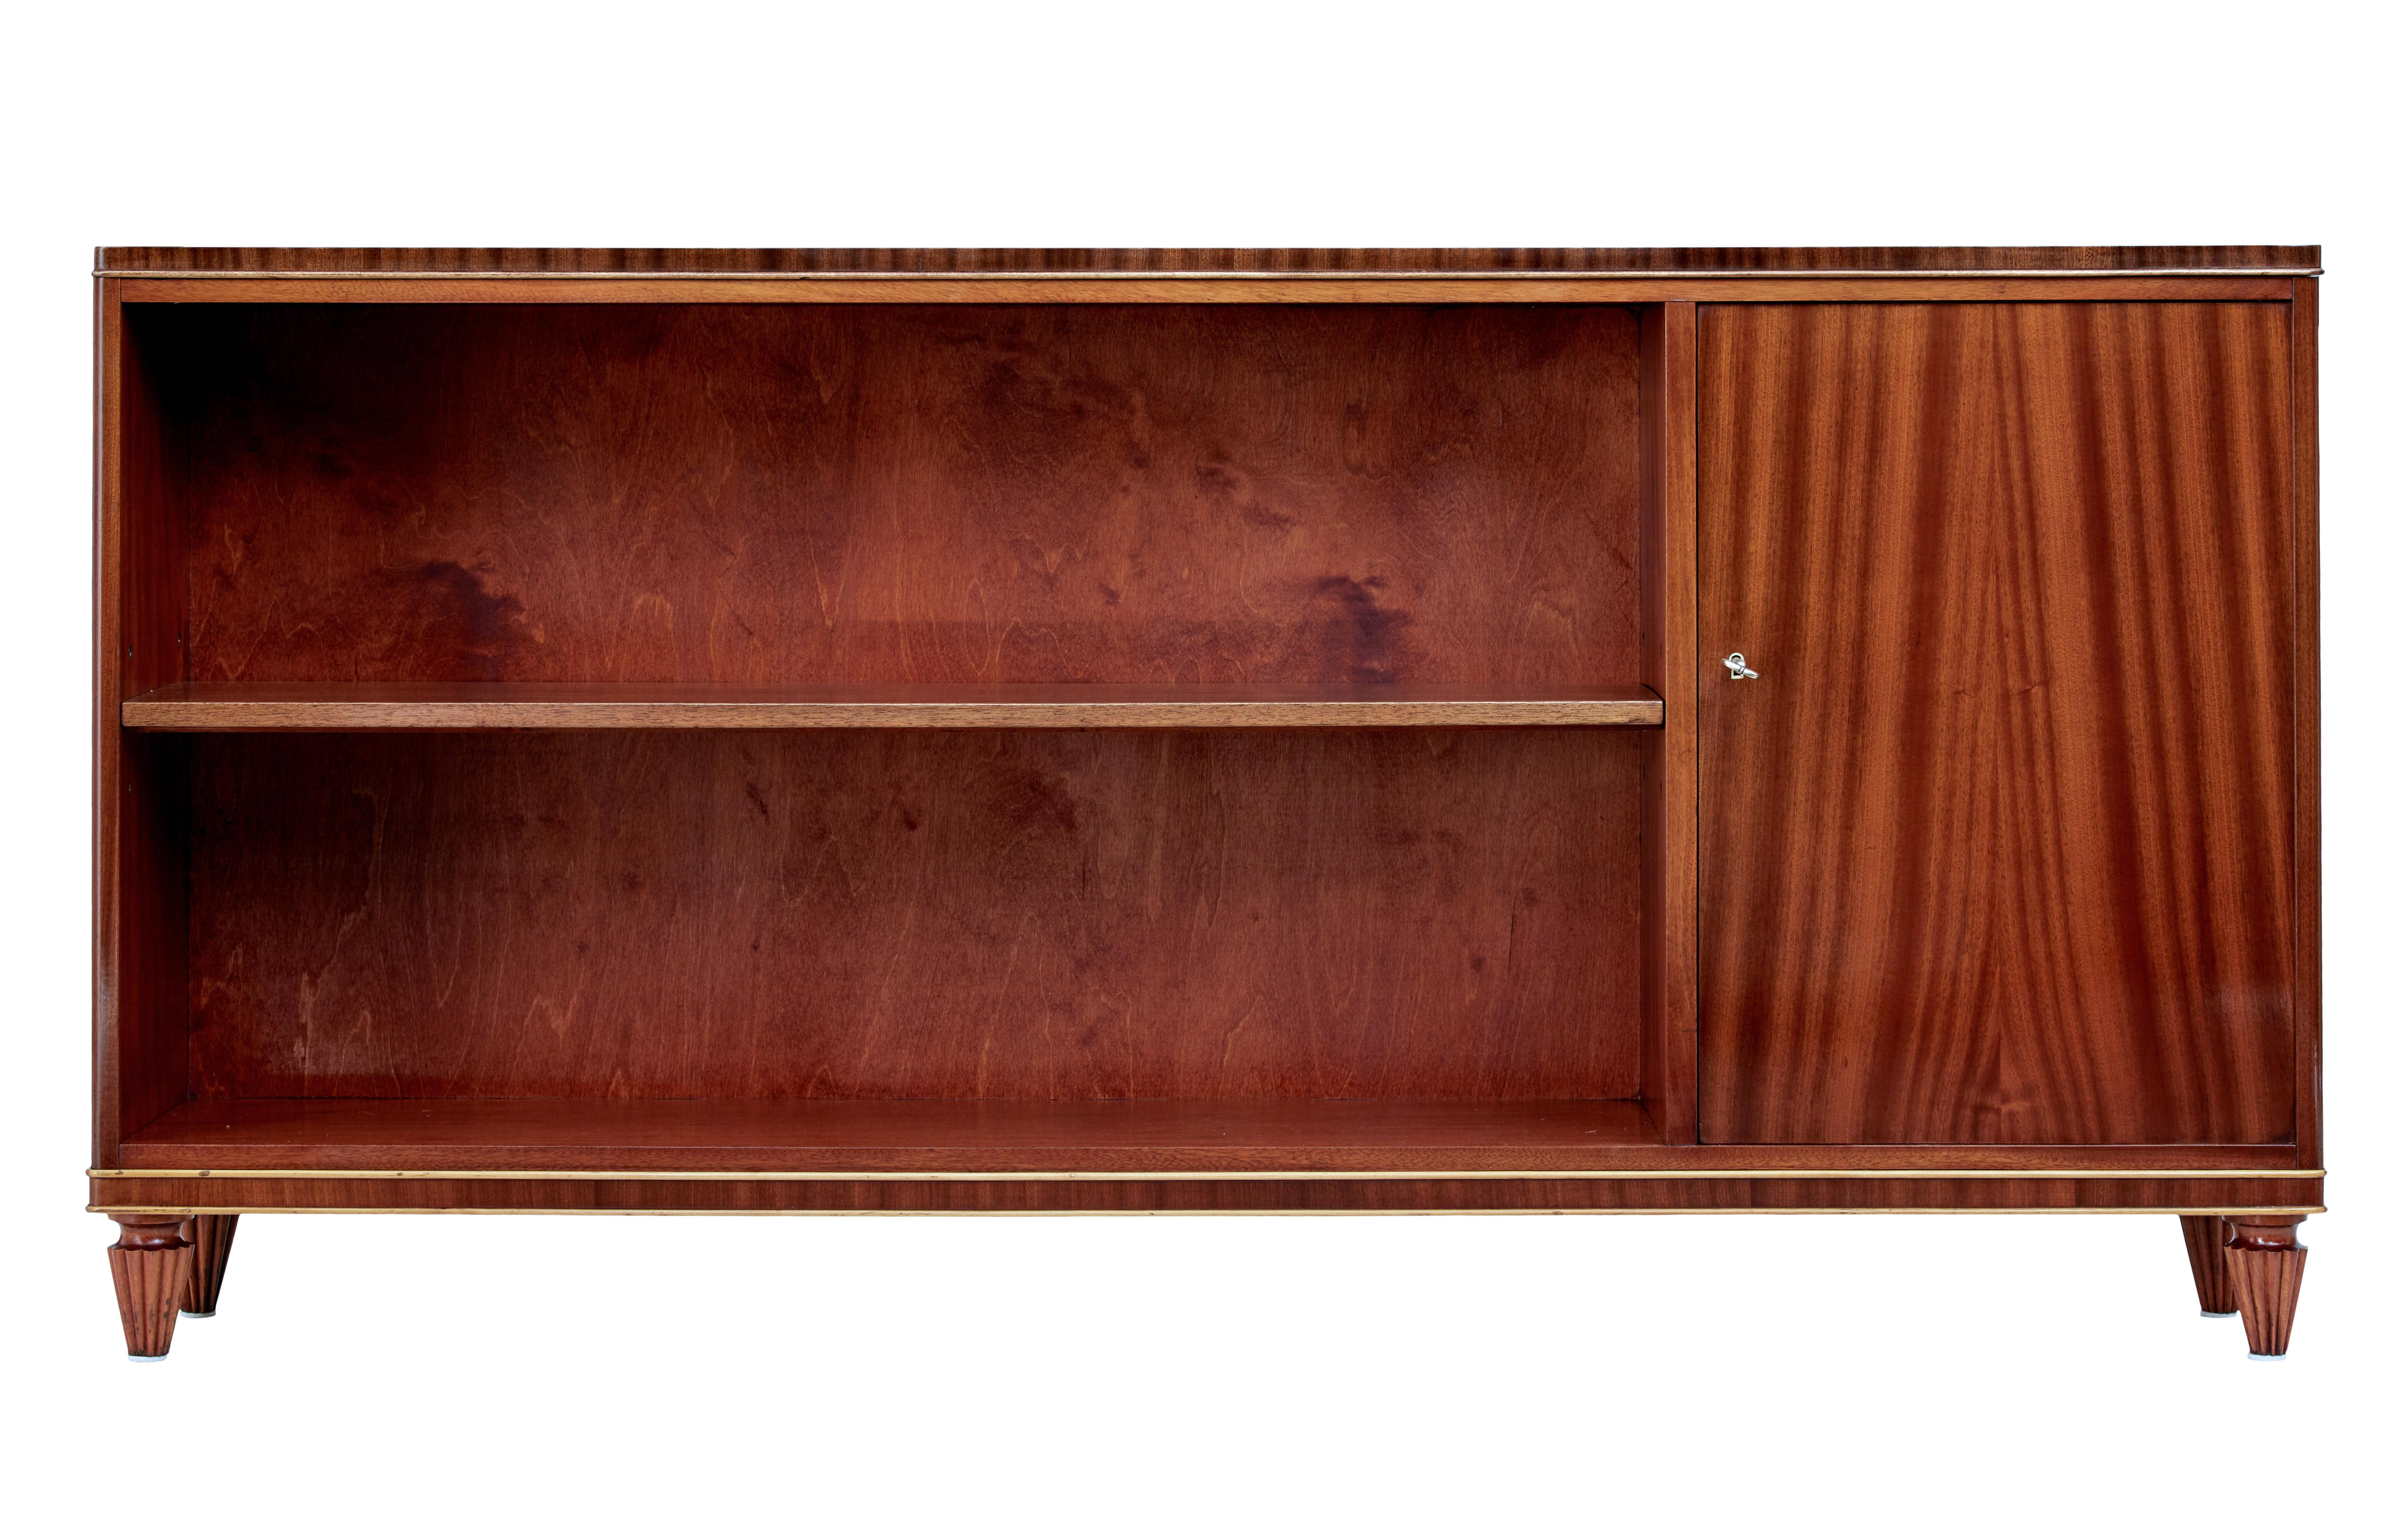 Mid-20th century Scandinavian mahogany open bookcase circa 1950.

Stylish bookcase cupboard combination. Single door cupboard to the left with matched flame mahogany veneers which opens to a single shelf. Main aperture for book storage with a